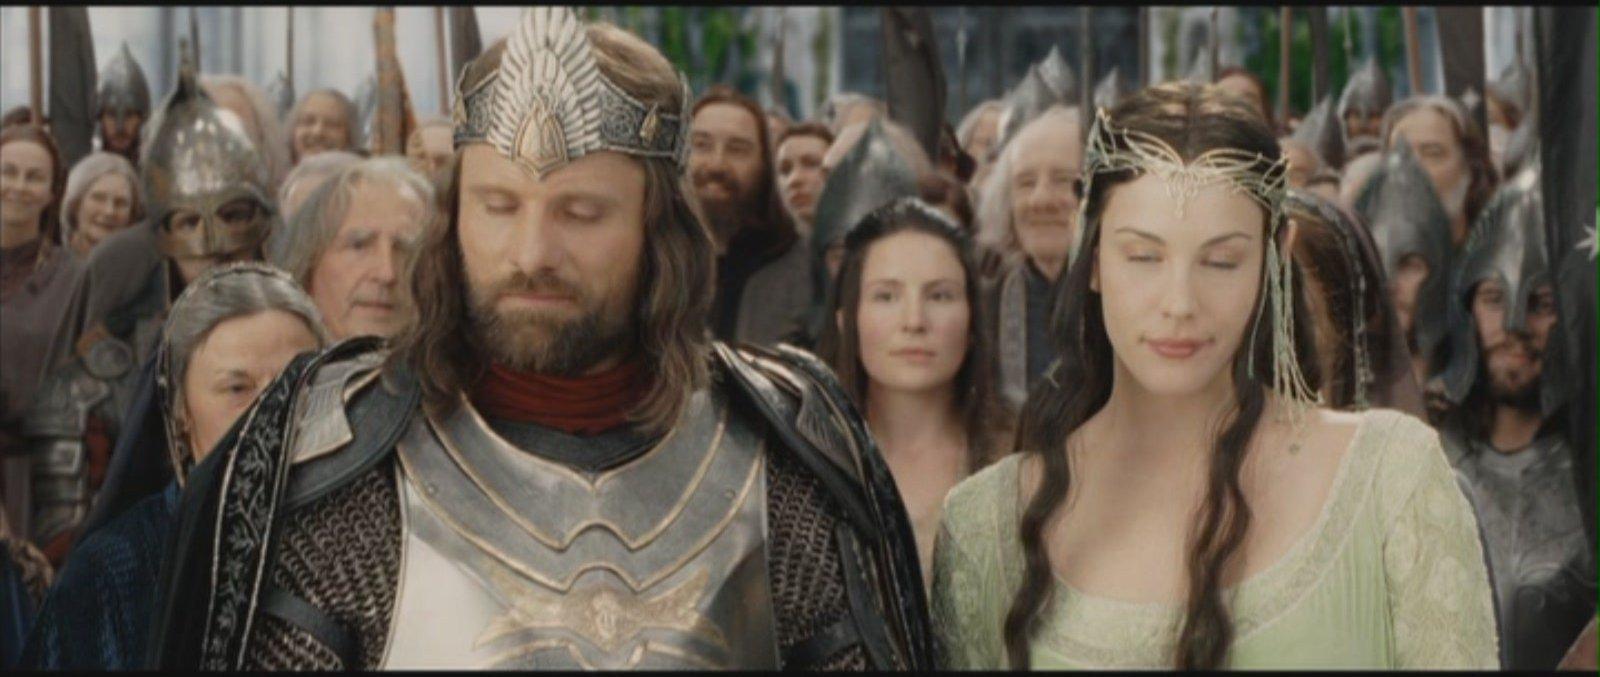 Aragorn and Arwen image Arwen and Aragorn of the Rings